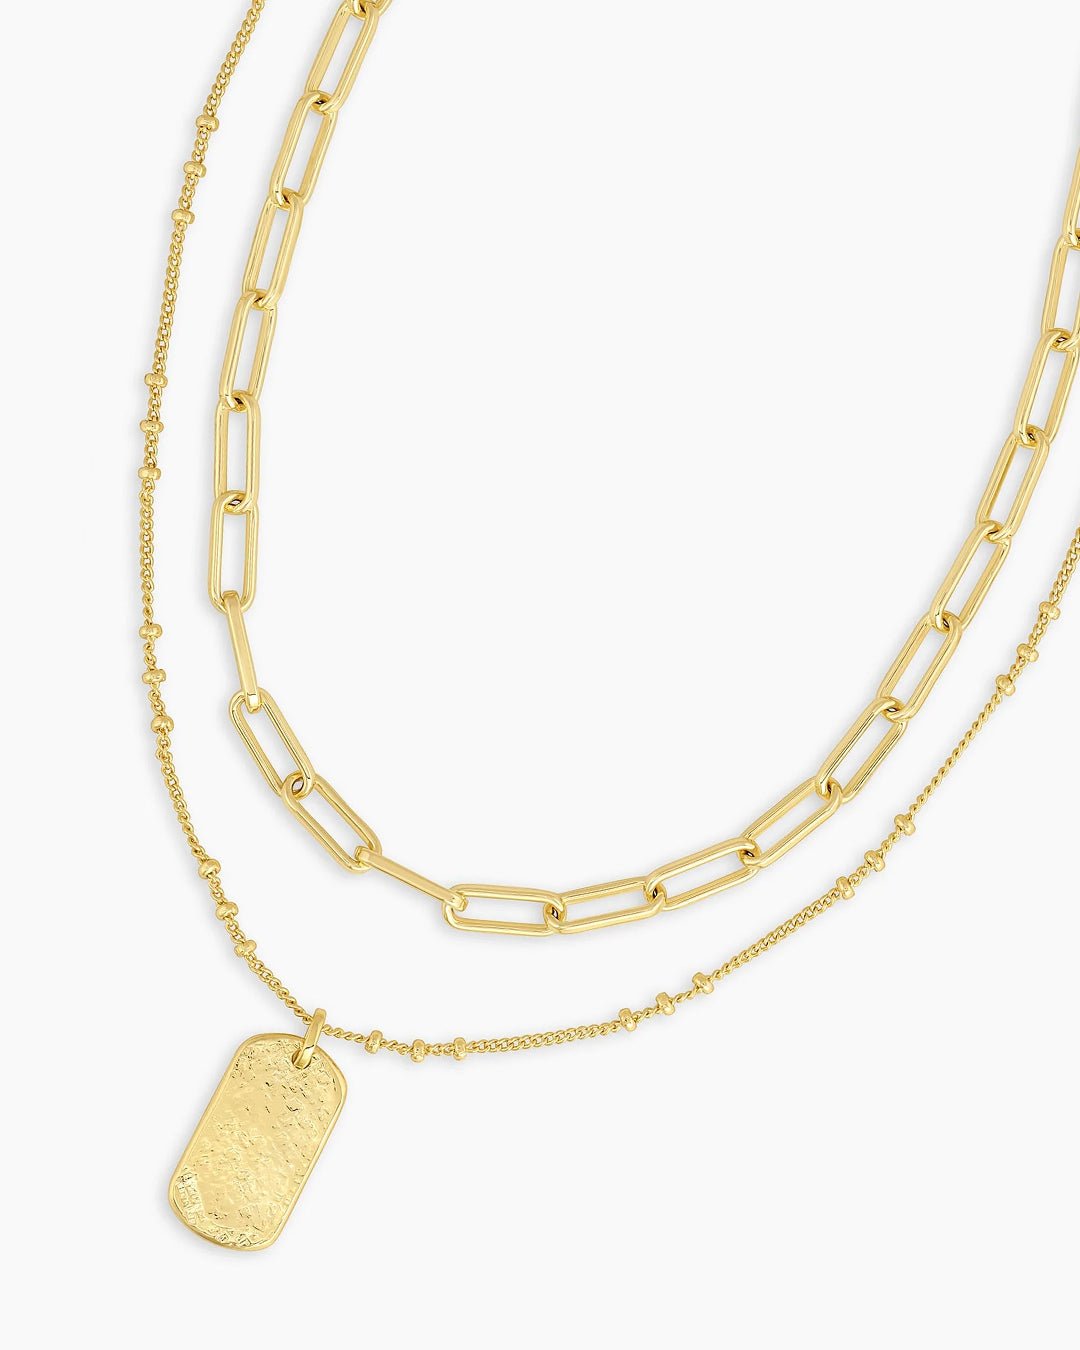 Parker Layering set,Gold Plated layered necklace  chain link necklace and dog tag necklace set || option::Gold Plated